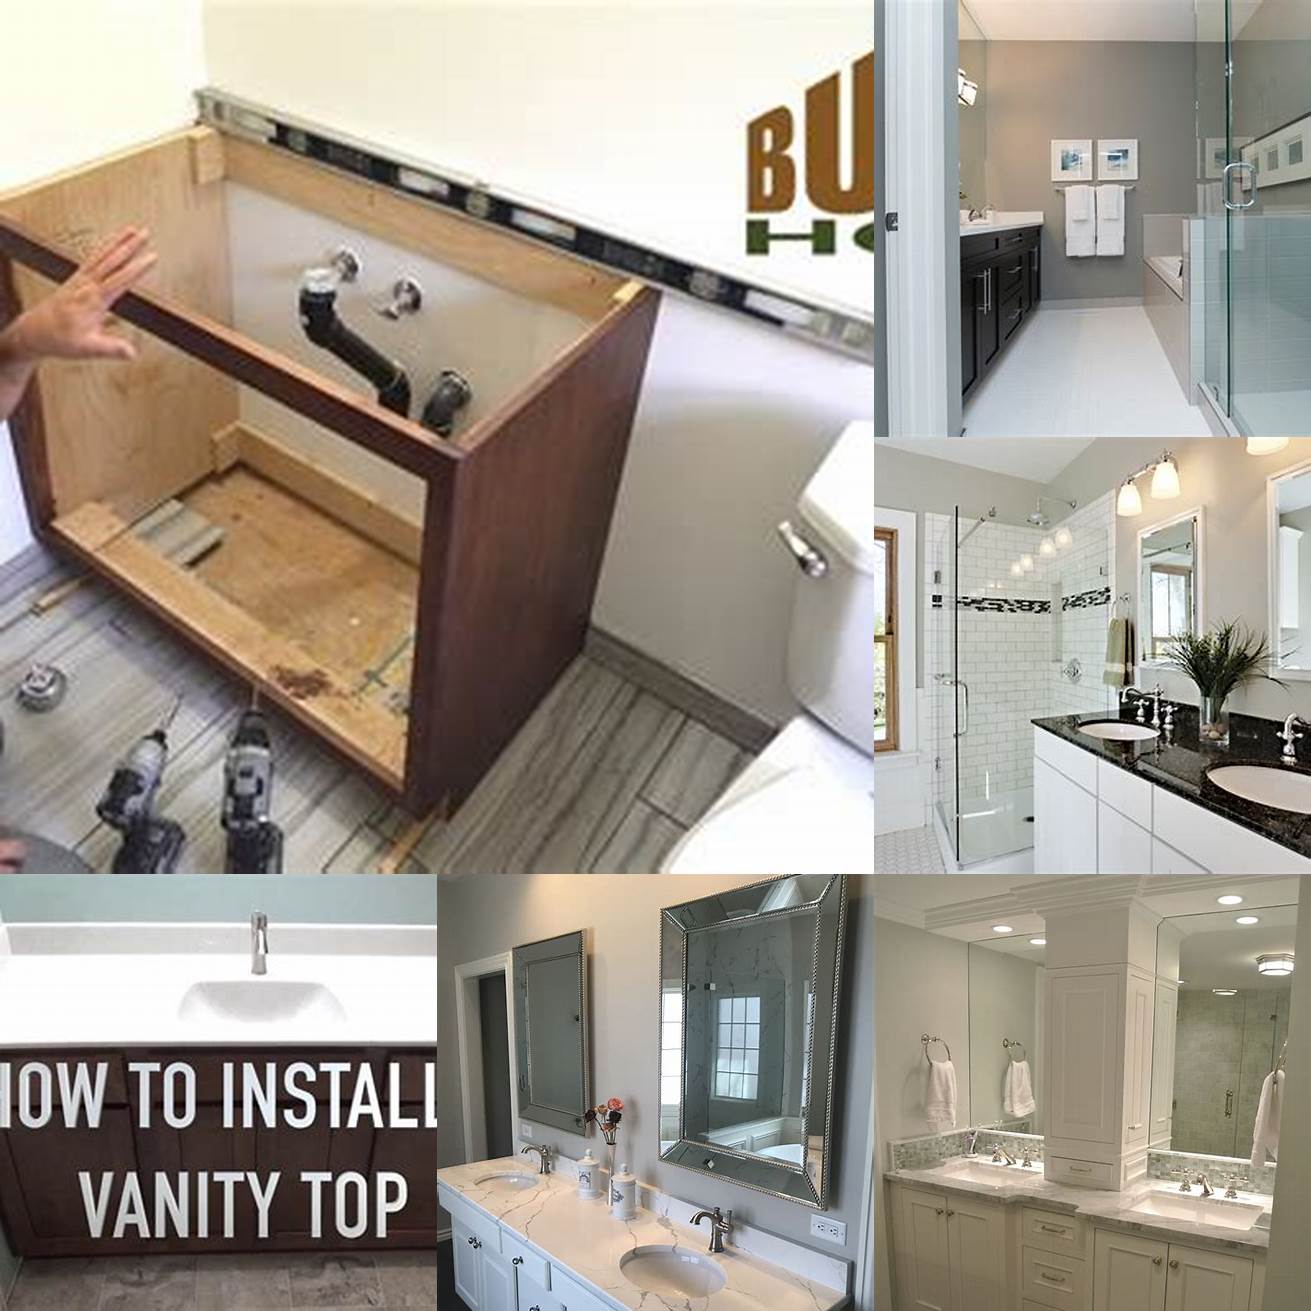 Value Installing a double vanity can increase your homes resale value and appeal to potential buyers